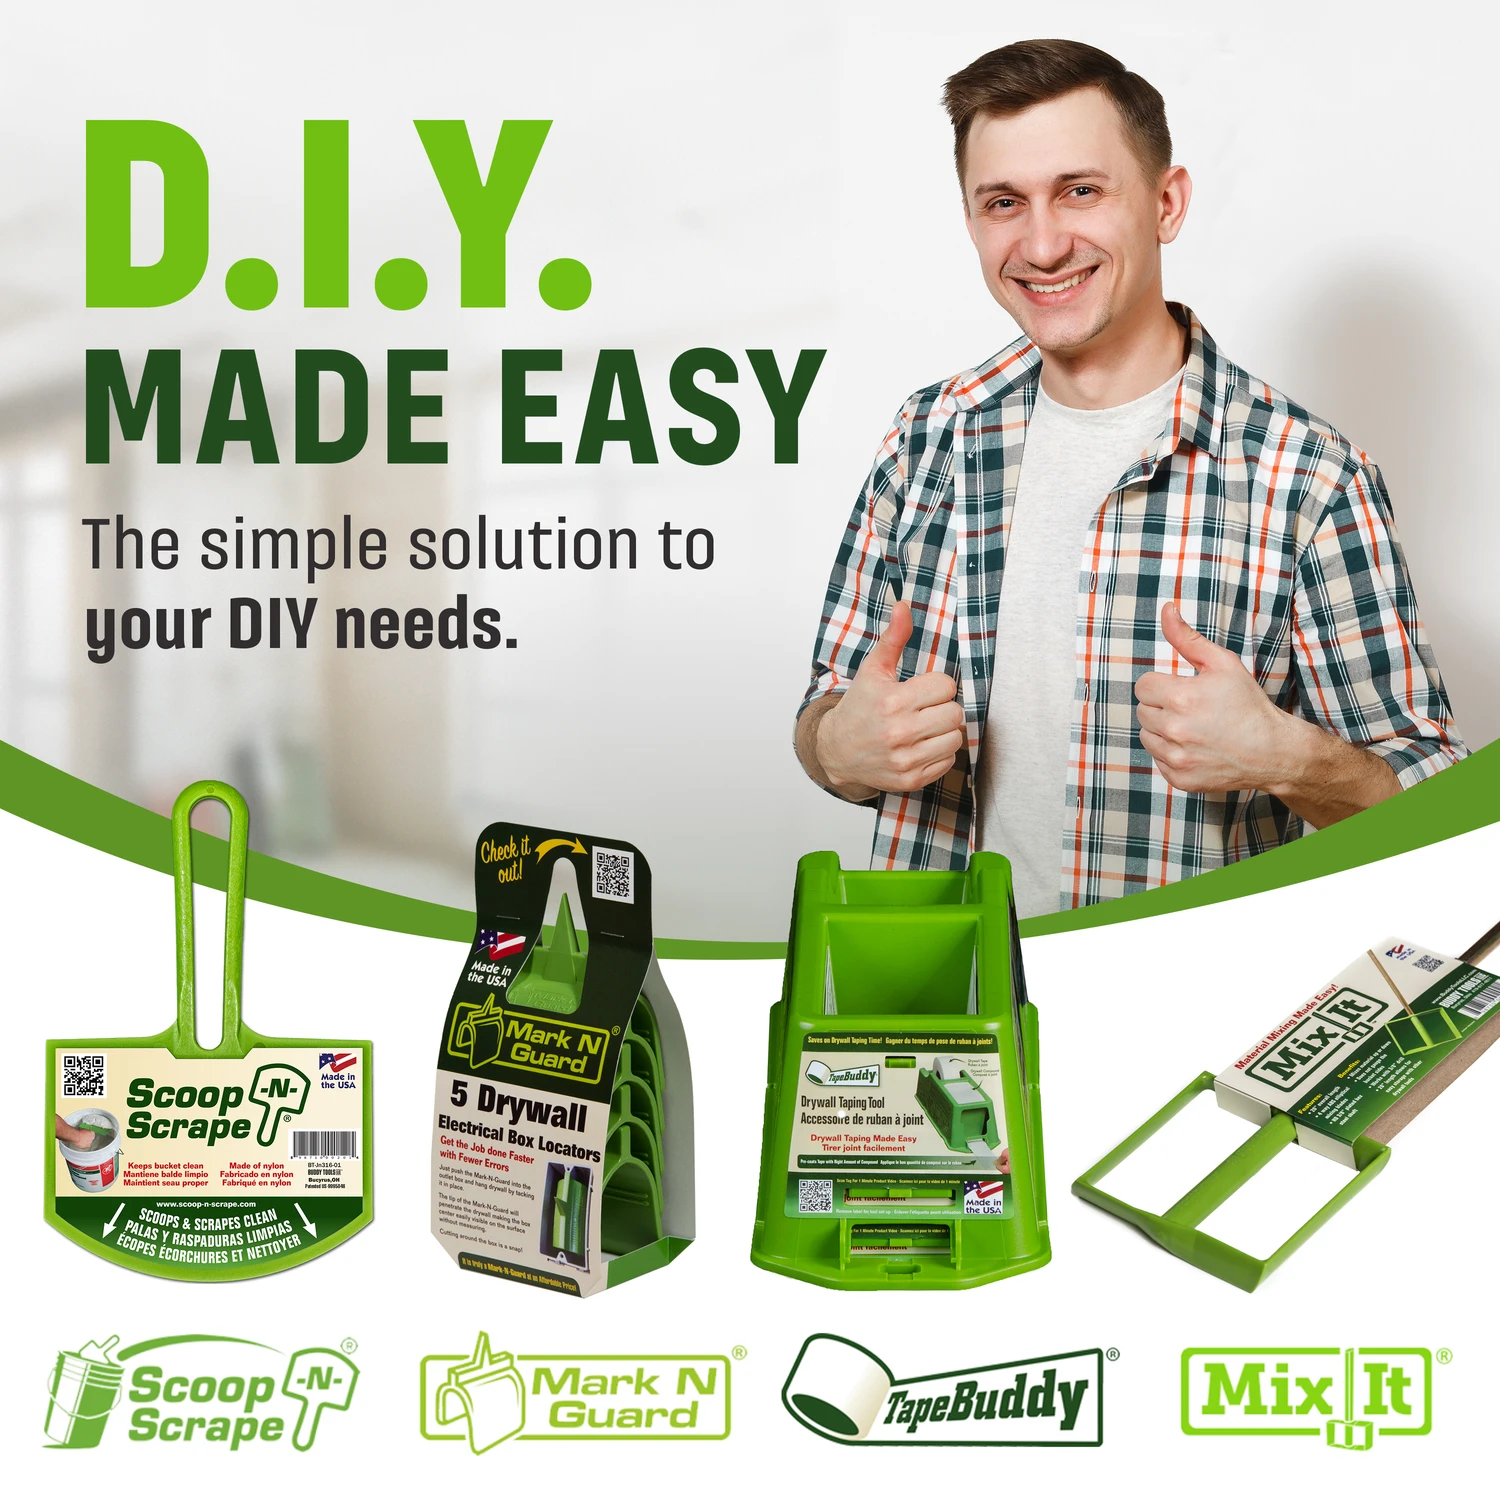 Ultimate Drywall Kit by Buddy Tools – 4 Tools in 1 – Includes Tape